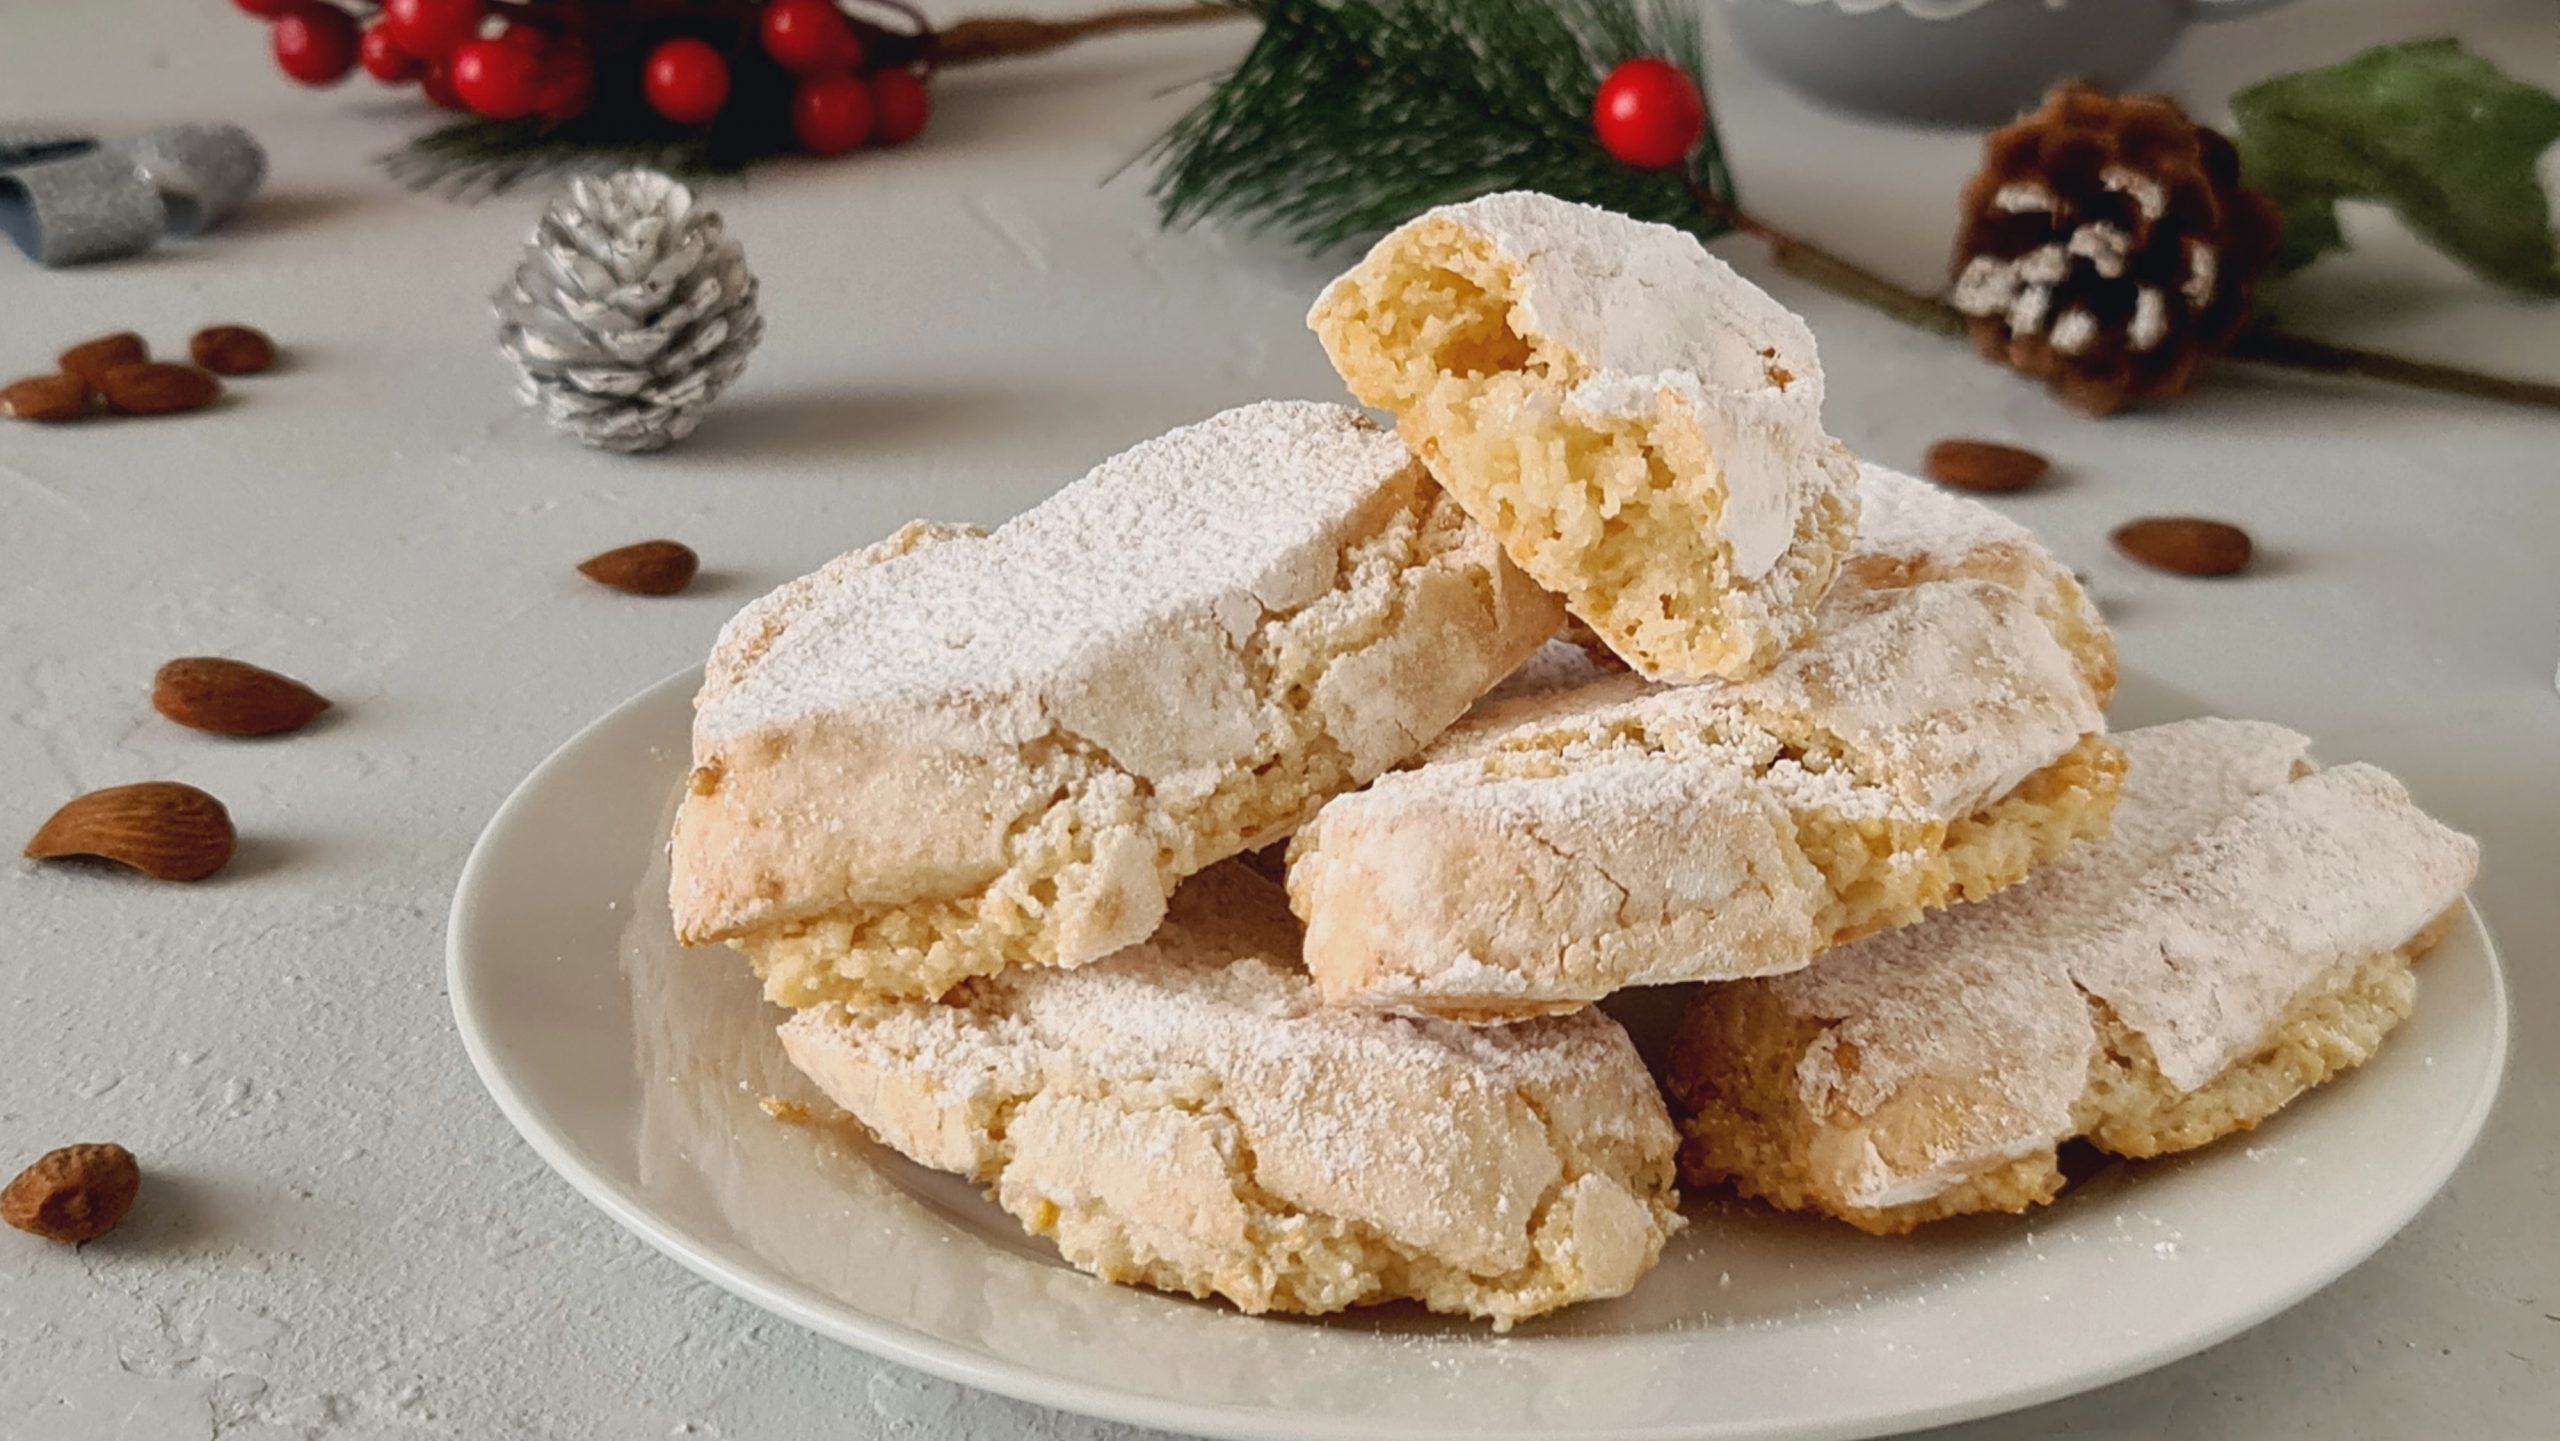 Ricciarelli - Rosly a passion for pastry